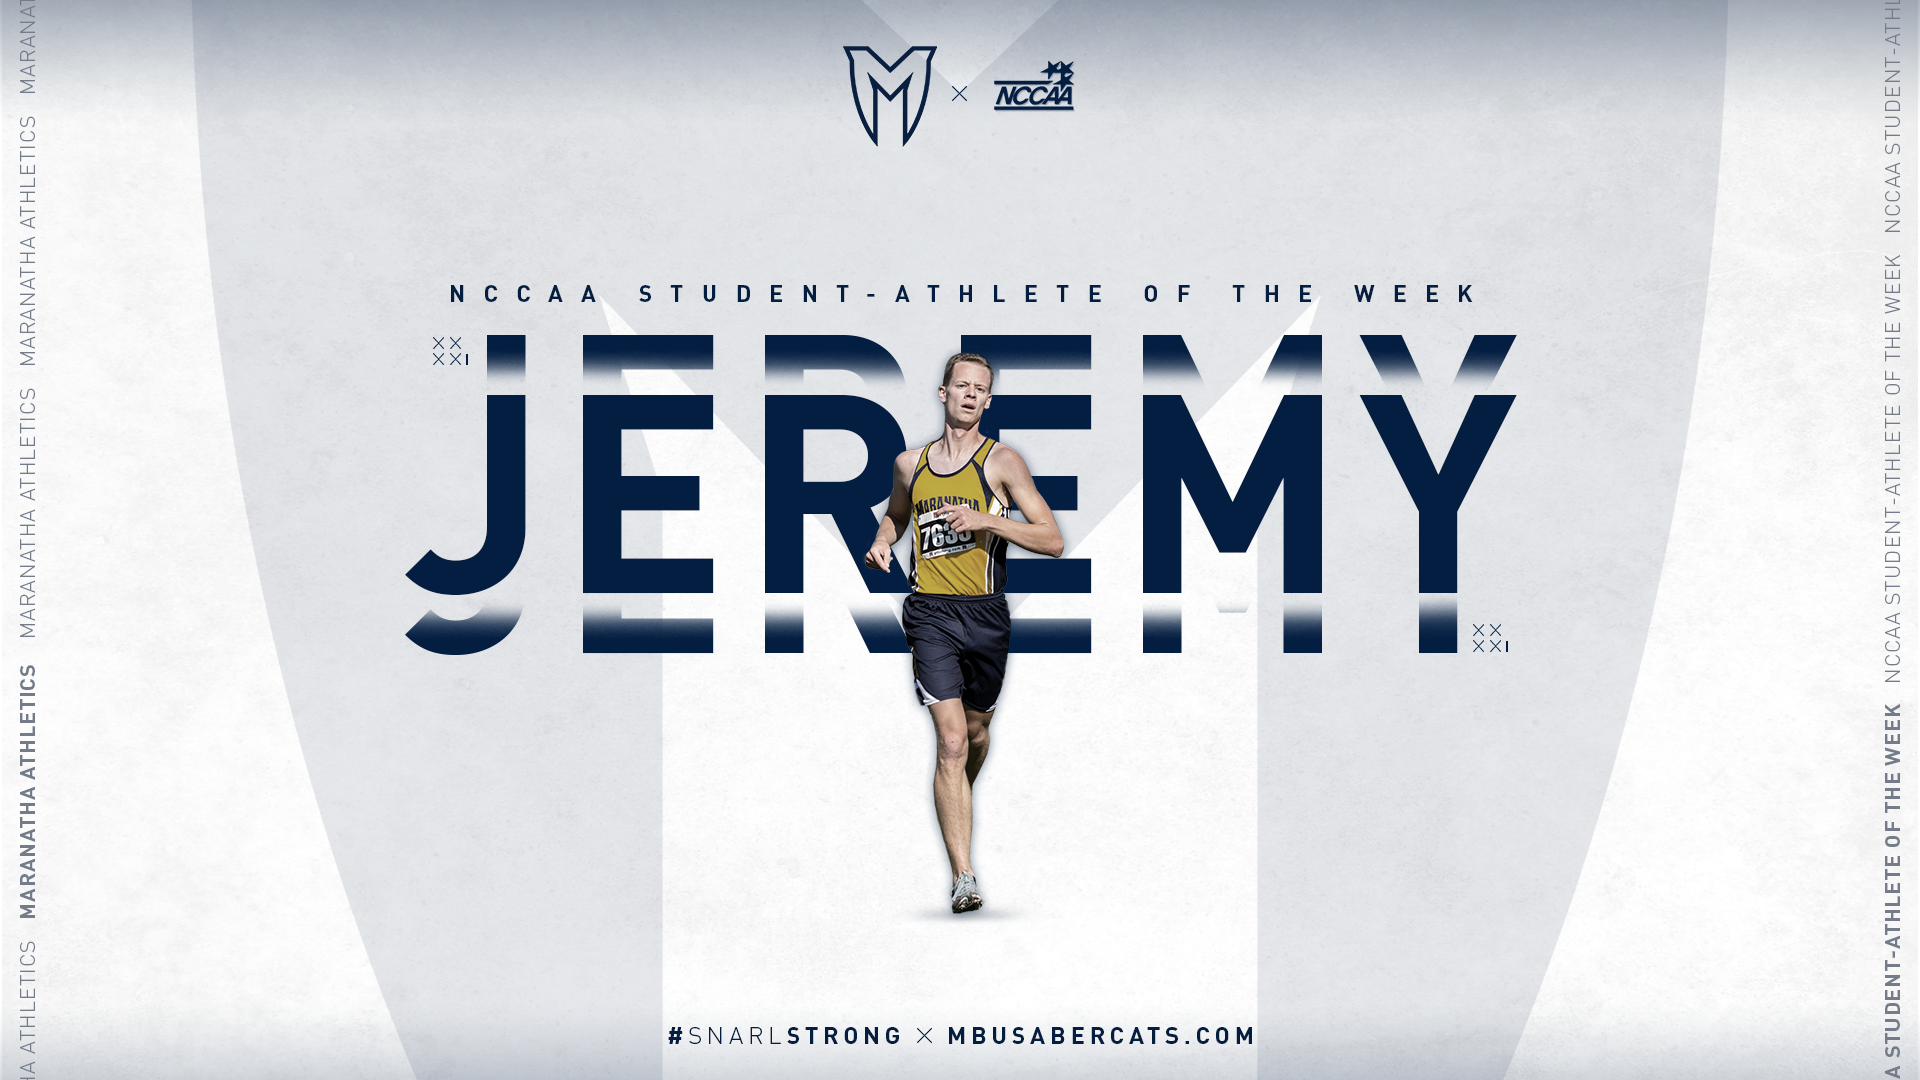 Fopma Selected as Student-Athlete of the Week